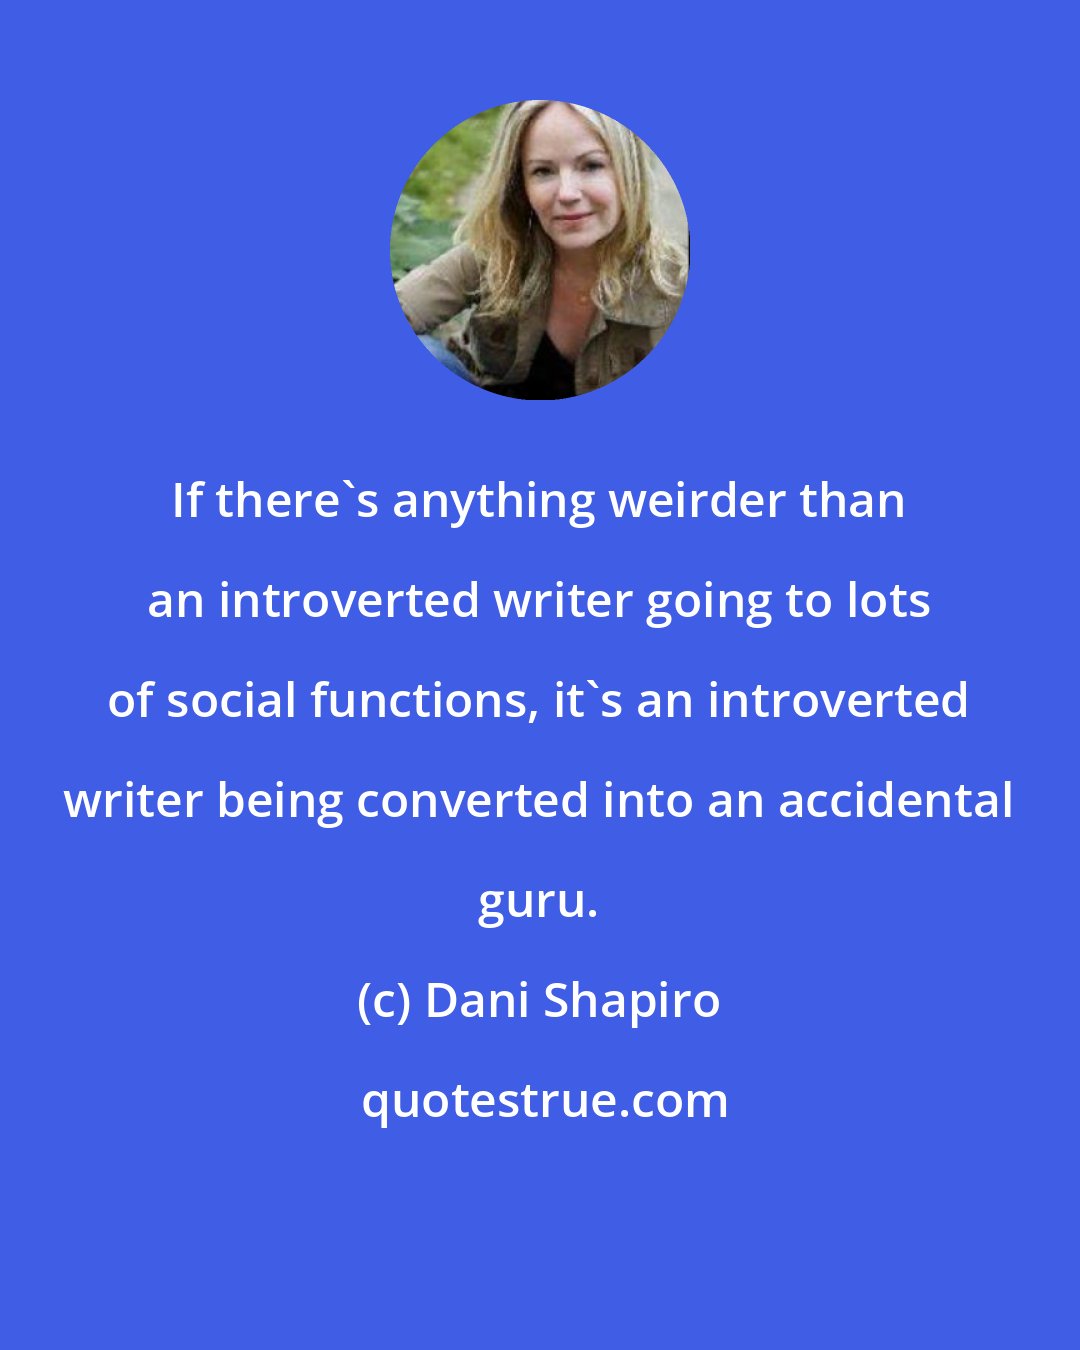 Dani Shapiro: If there's anything weirder than an introverted writer going to lots of social functions, it's an introverted writer being converted into an accidental guru.